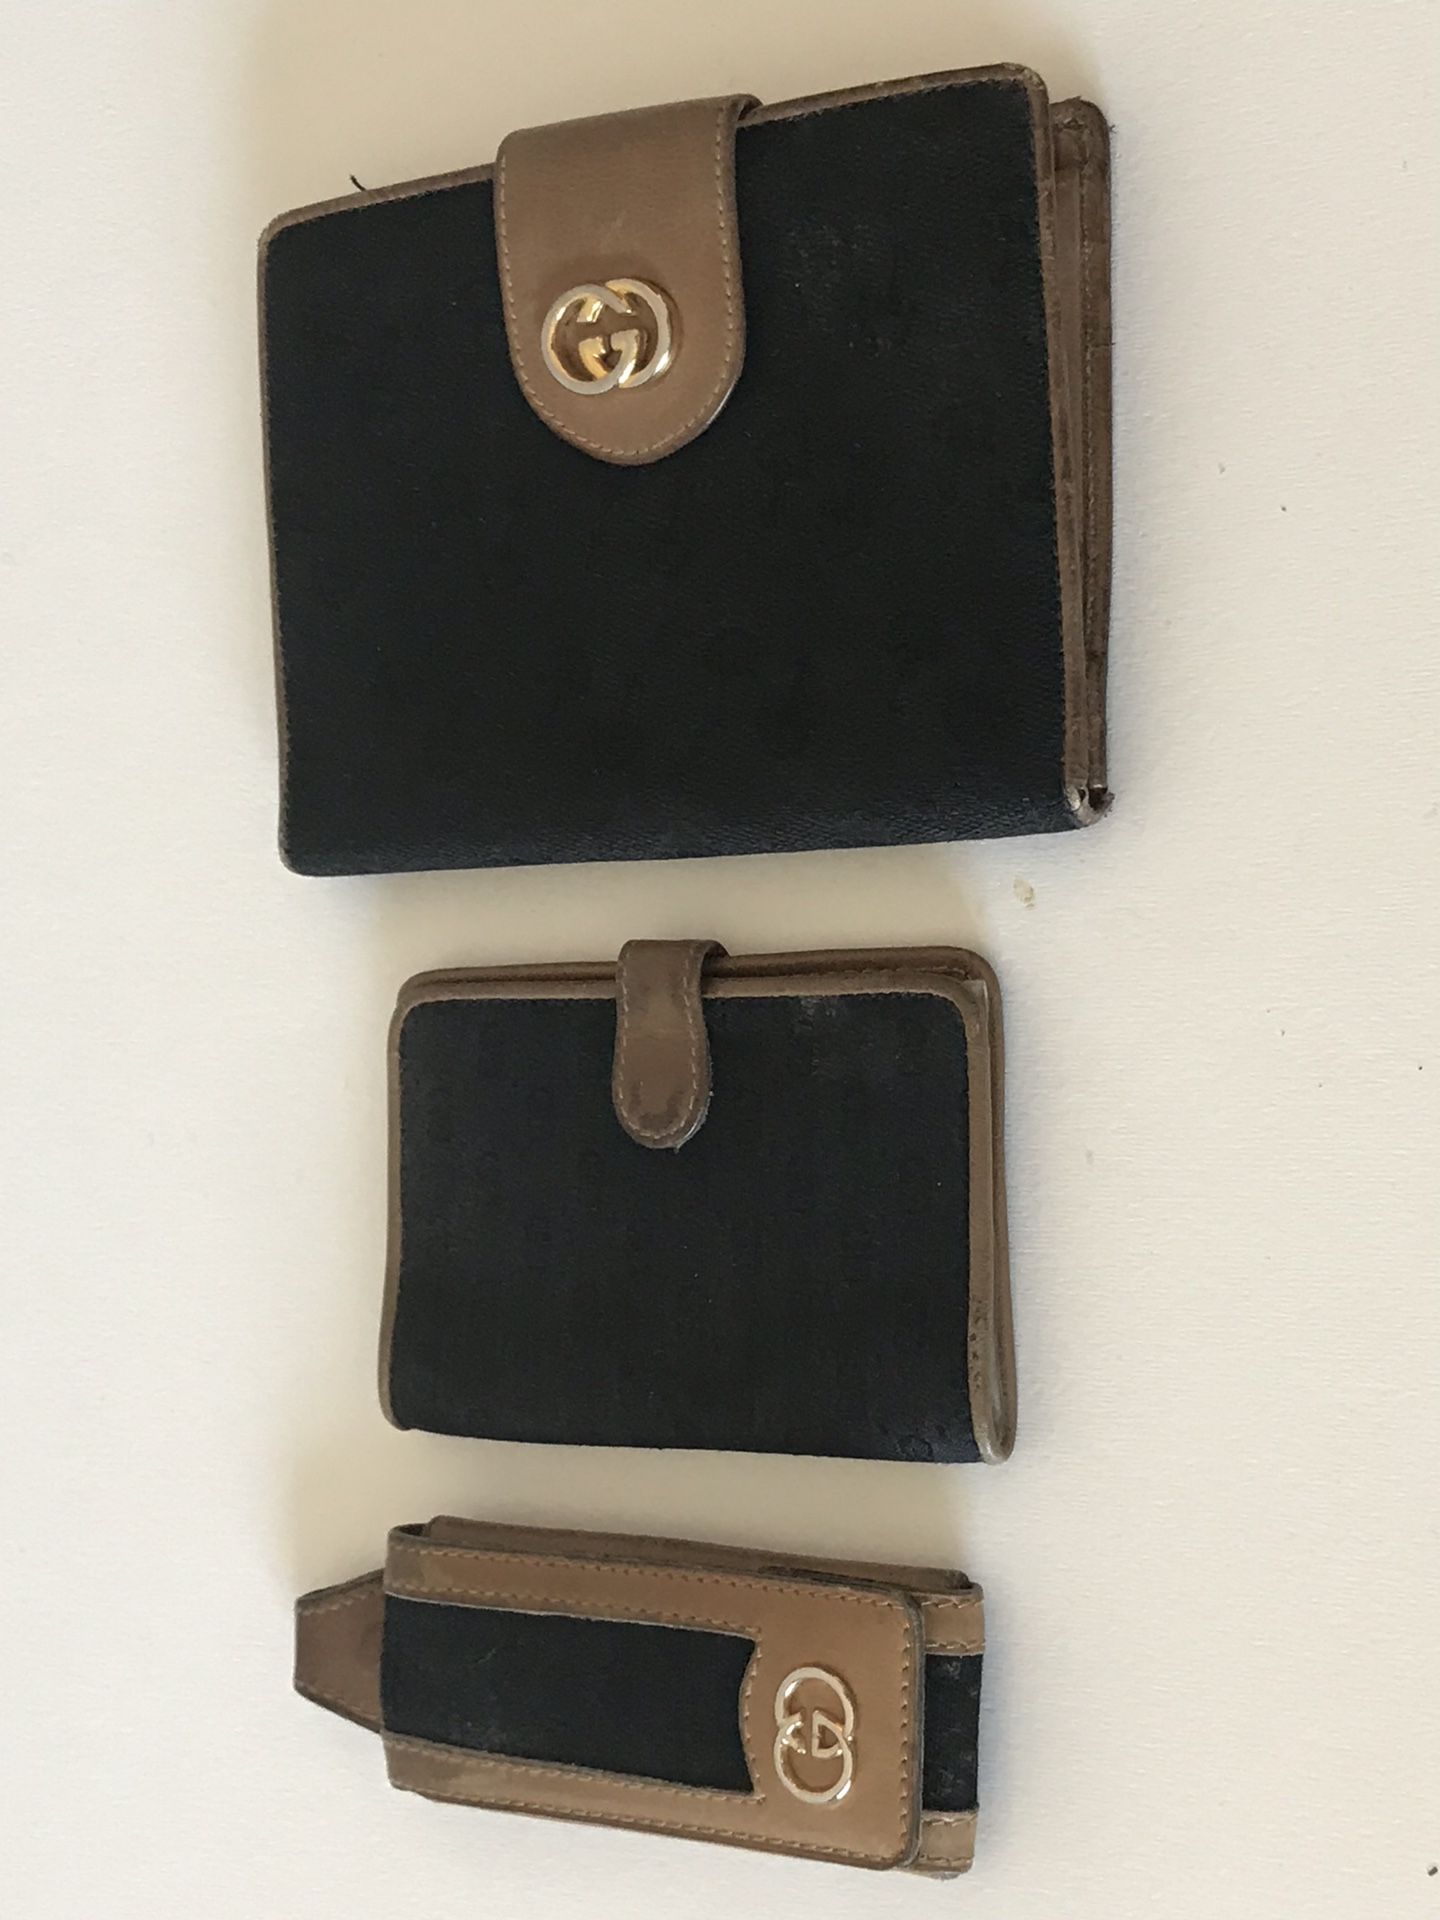 VINTAGE GUCCI WALLET & KEY CHAIN SET - 100% AUTHENTIC MADE IN ITALY